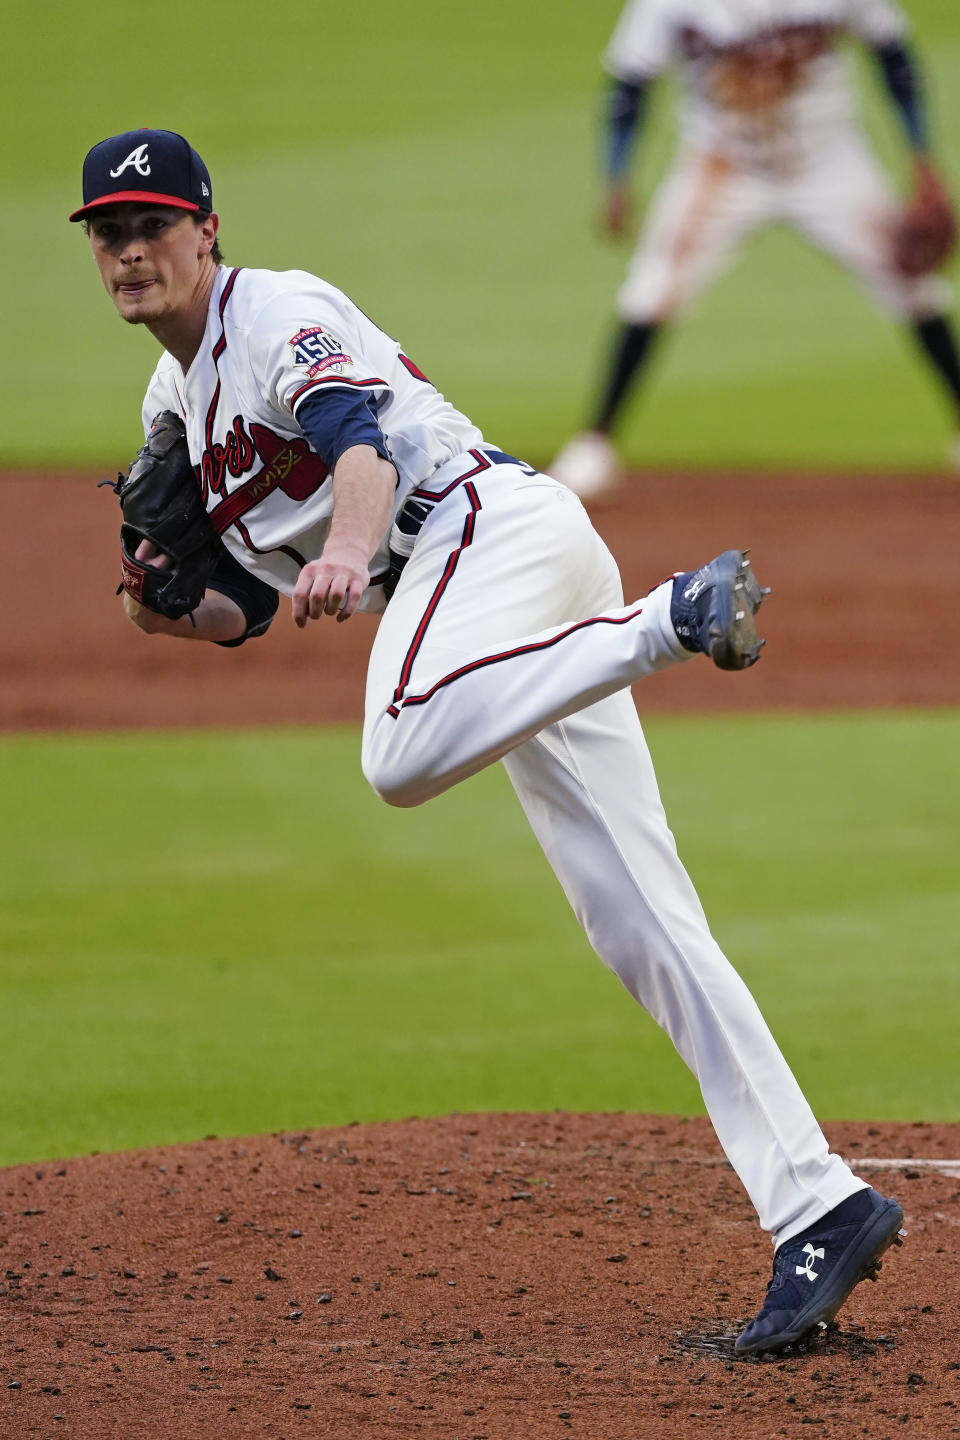 Atlanta Braves pitcher Max Fried works in the second inning of the team's baseball game against the New York Mets on Wednesday, June 30, 2021, in Atlanta. (AP Photo/John Bazemore)